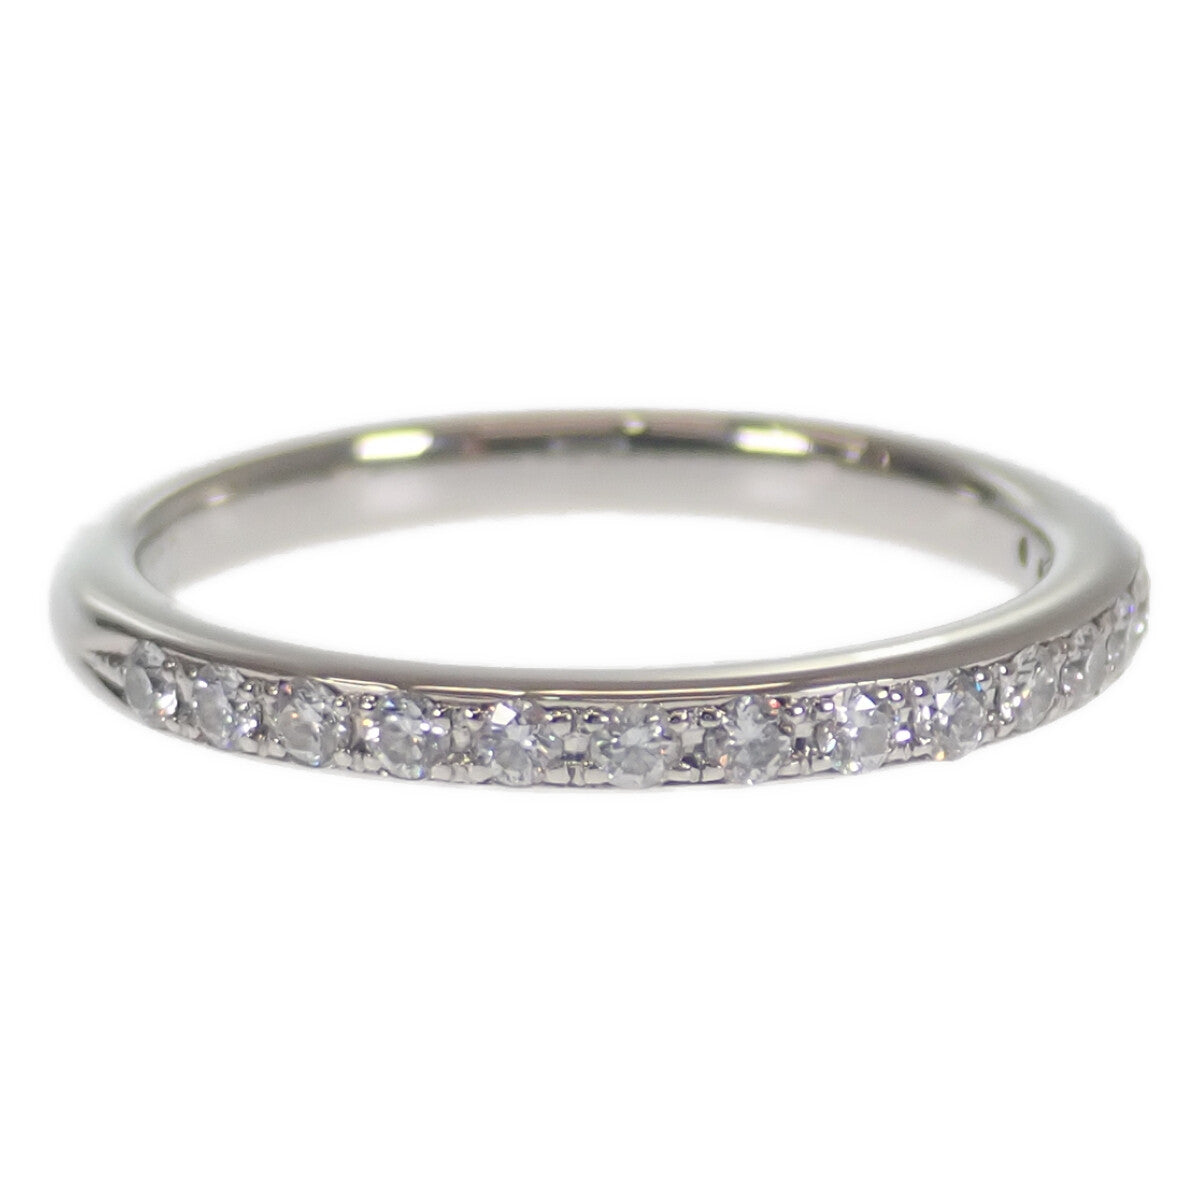 Half Eternity Design Ring in PT900 Platinum with 0.21Ct Diamonds, Size 10 - Silver, for Women- Classic and Elegant- (Pre-owned)